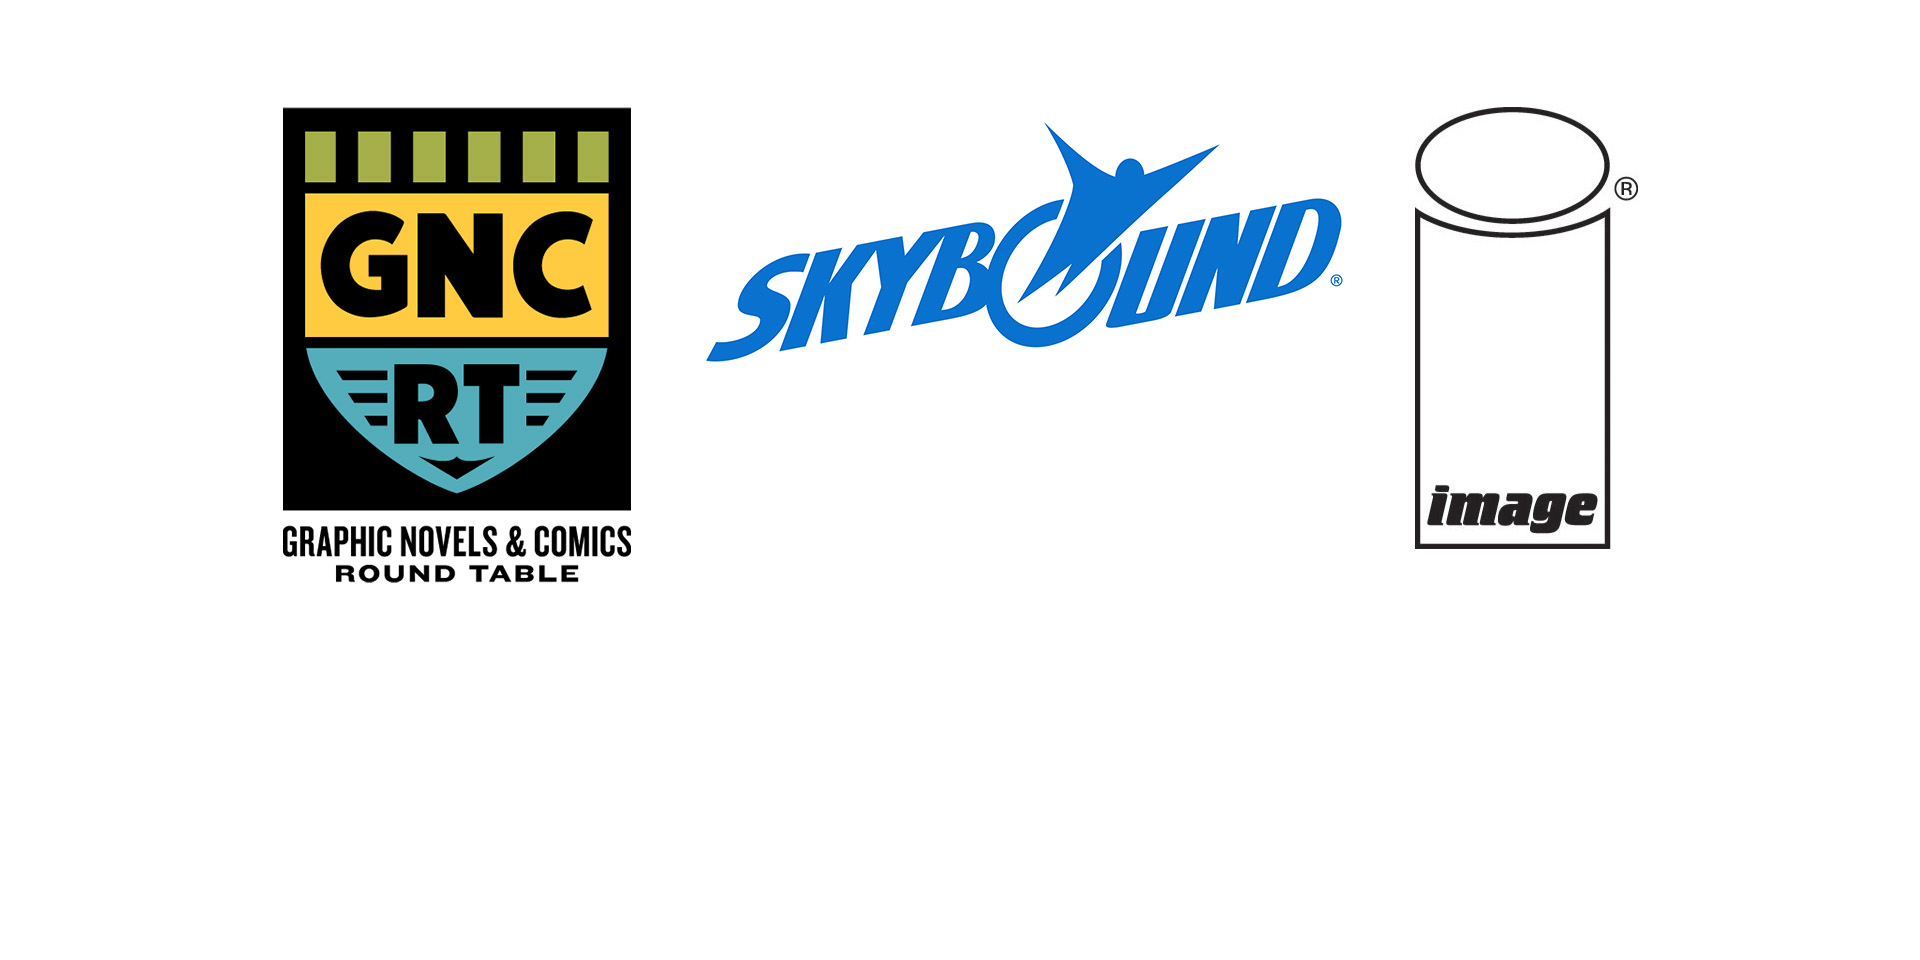 Graphic Novels & Comics Round Table Introduces Comics Librarian Conference Travel Grant with funding from Image Comics and Skybound Entertainment